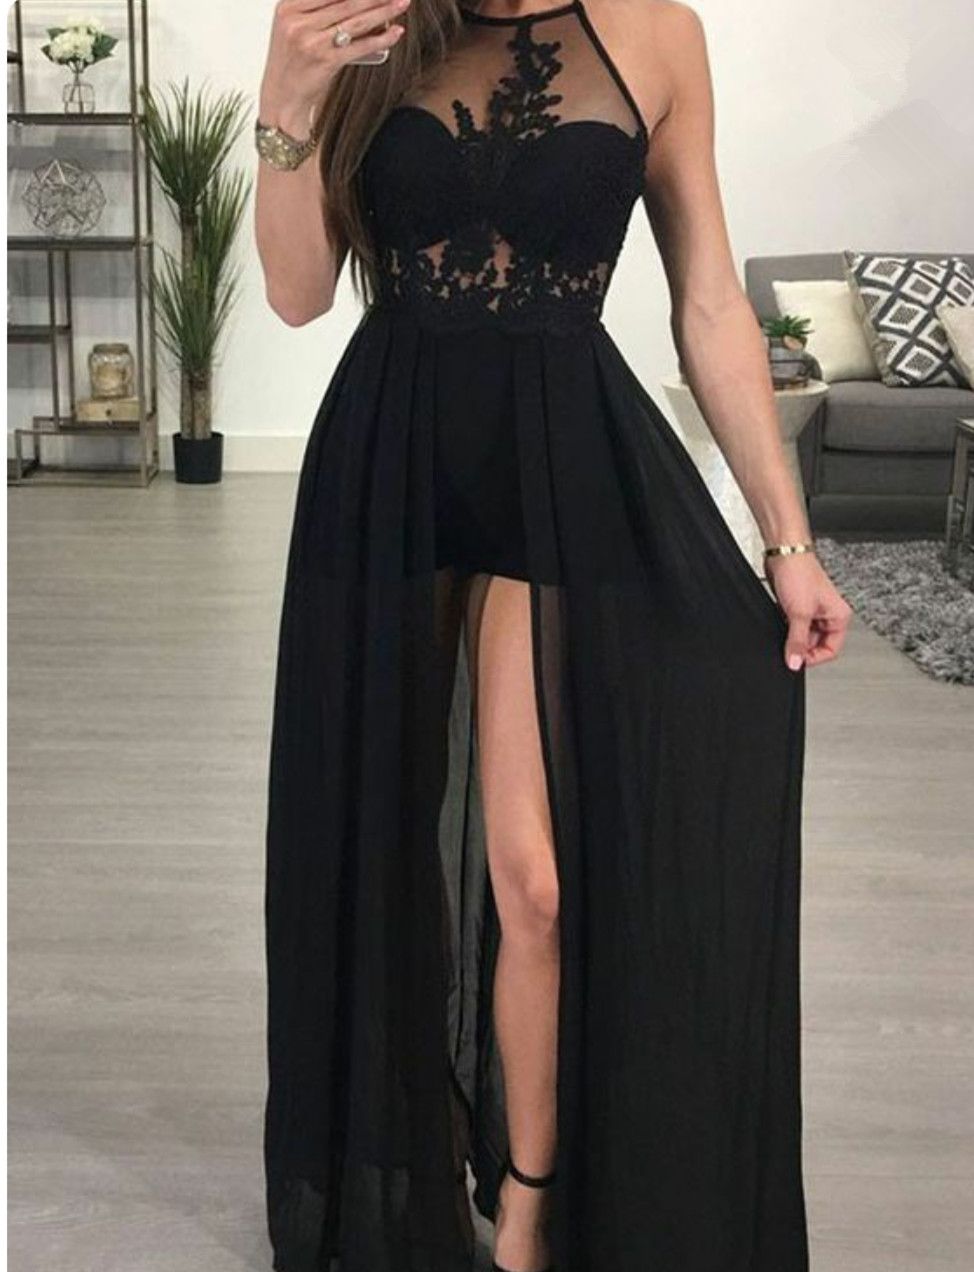 2017 Sexy Black Evening Dresses Side Split Chiffon Long Prom Gowns Halter Sheer With Applique 